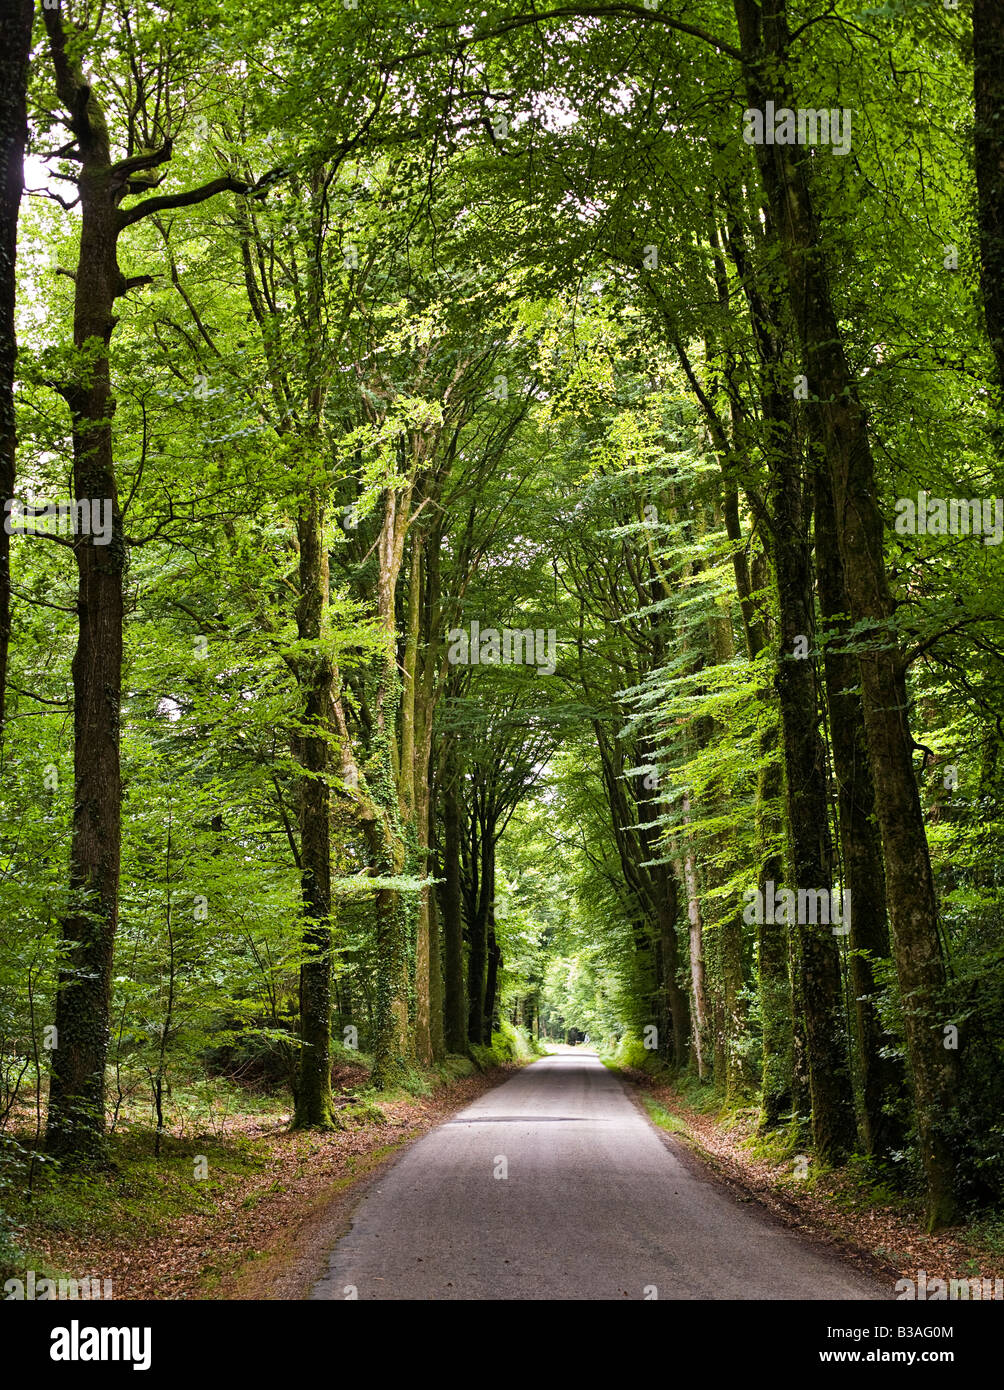 Country road through a forest Stock Photo